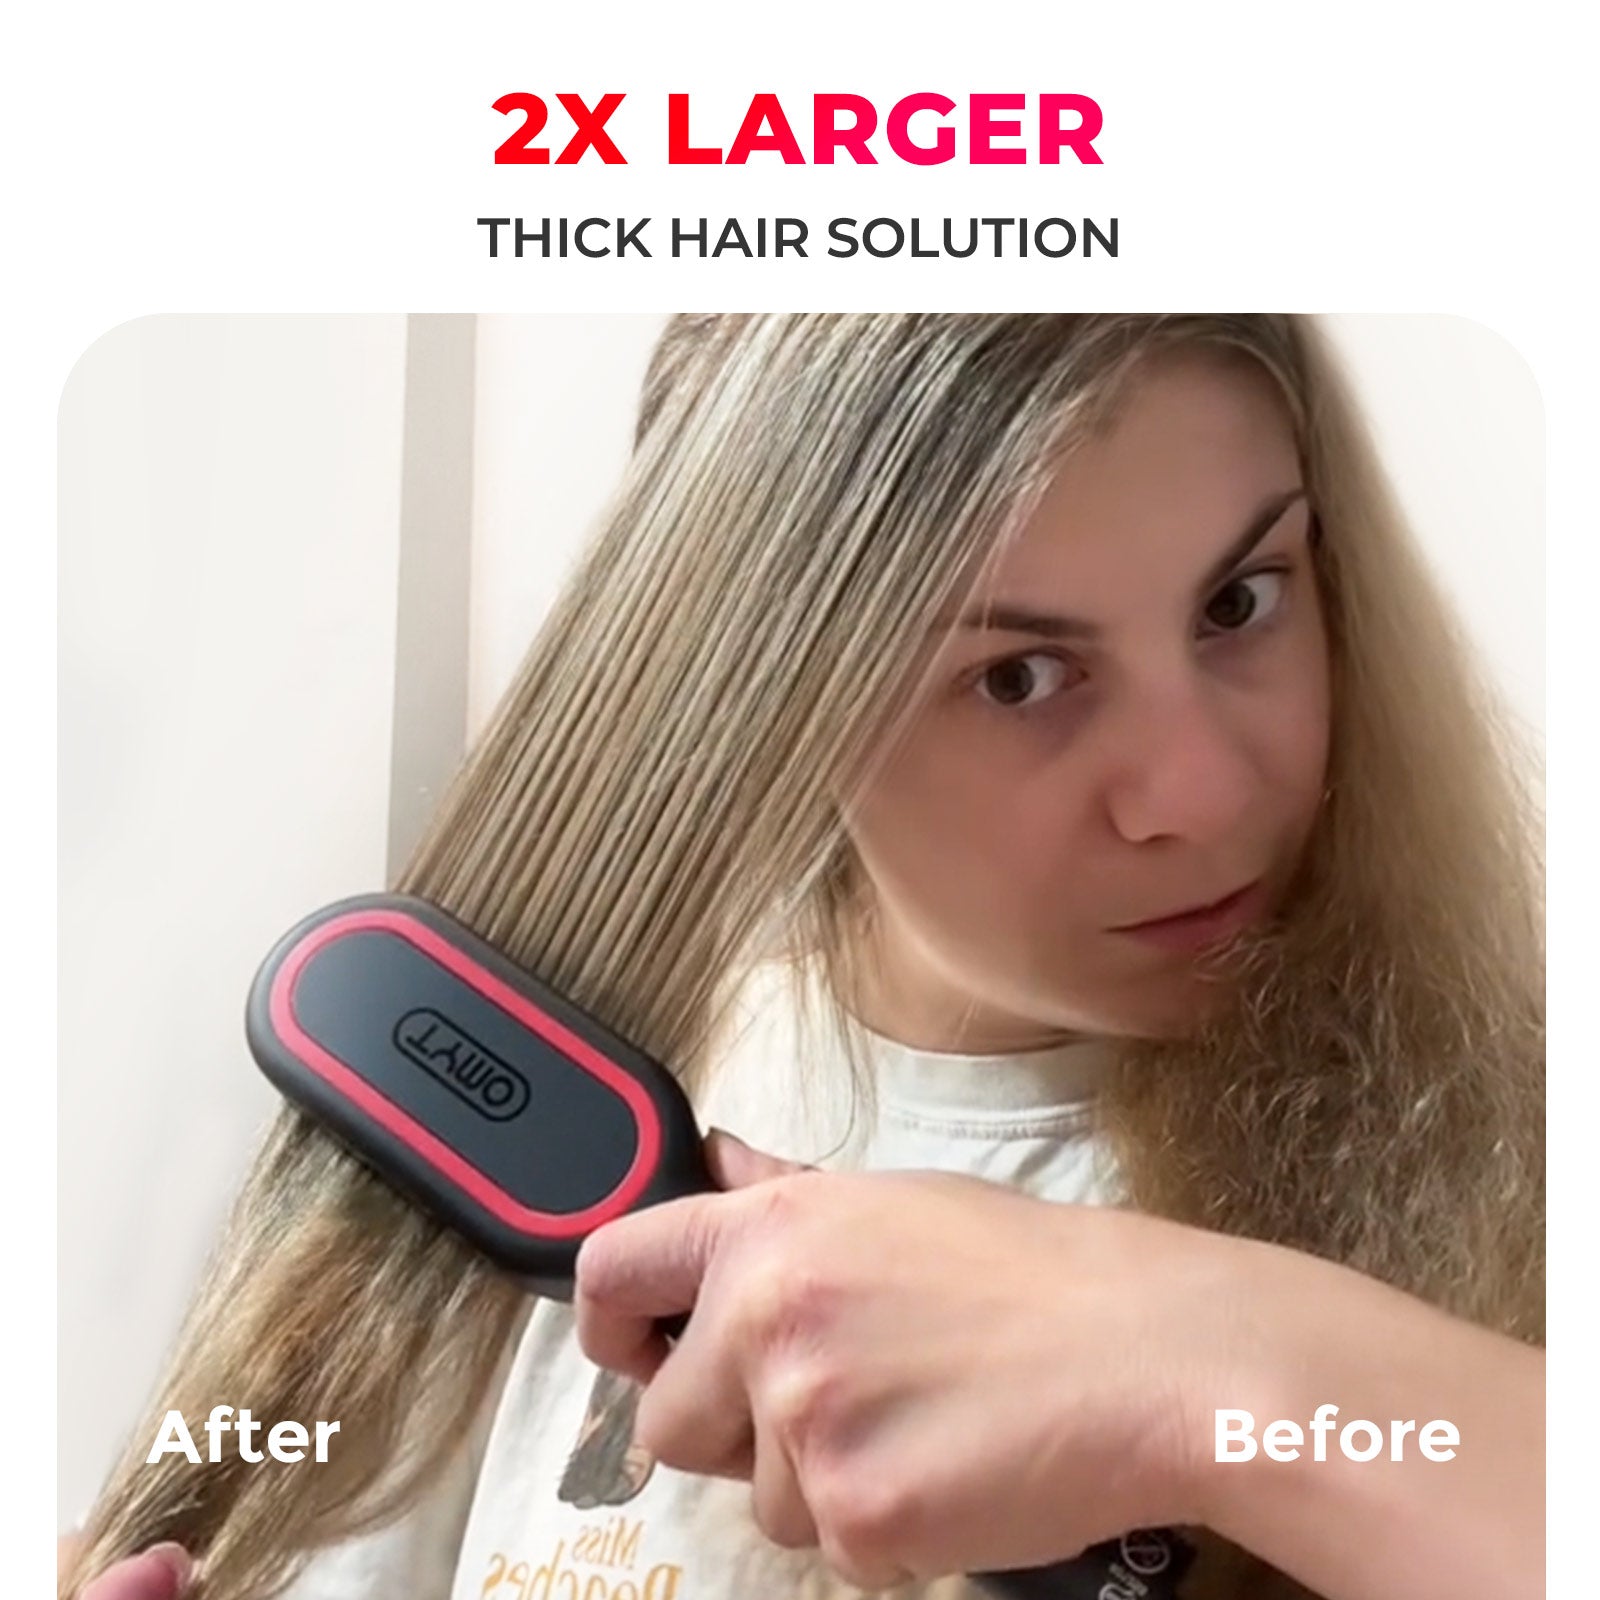 TYMO IONIC PLUS hair straightener brush is twice as large, making it easier to straighten thick hair.